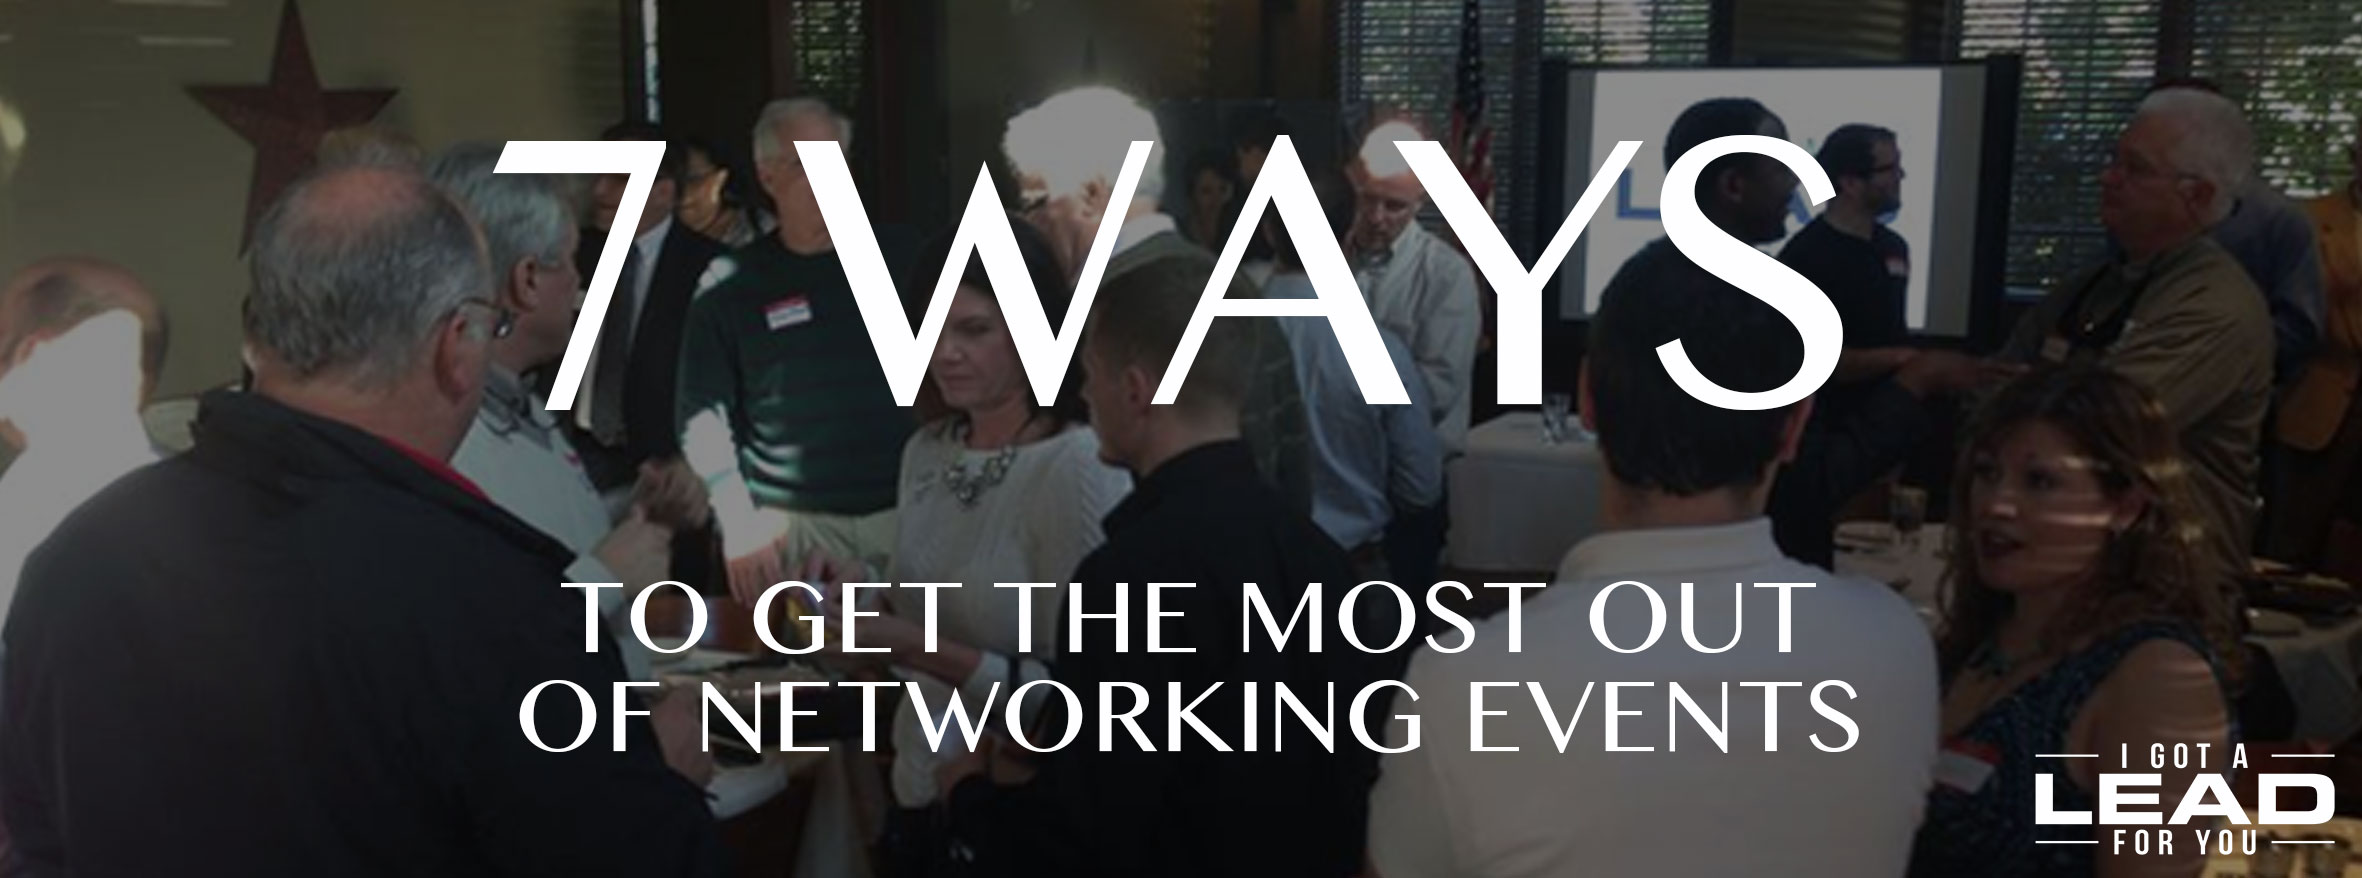 7 Ways to Get the Most Out of Networking Events